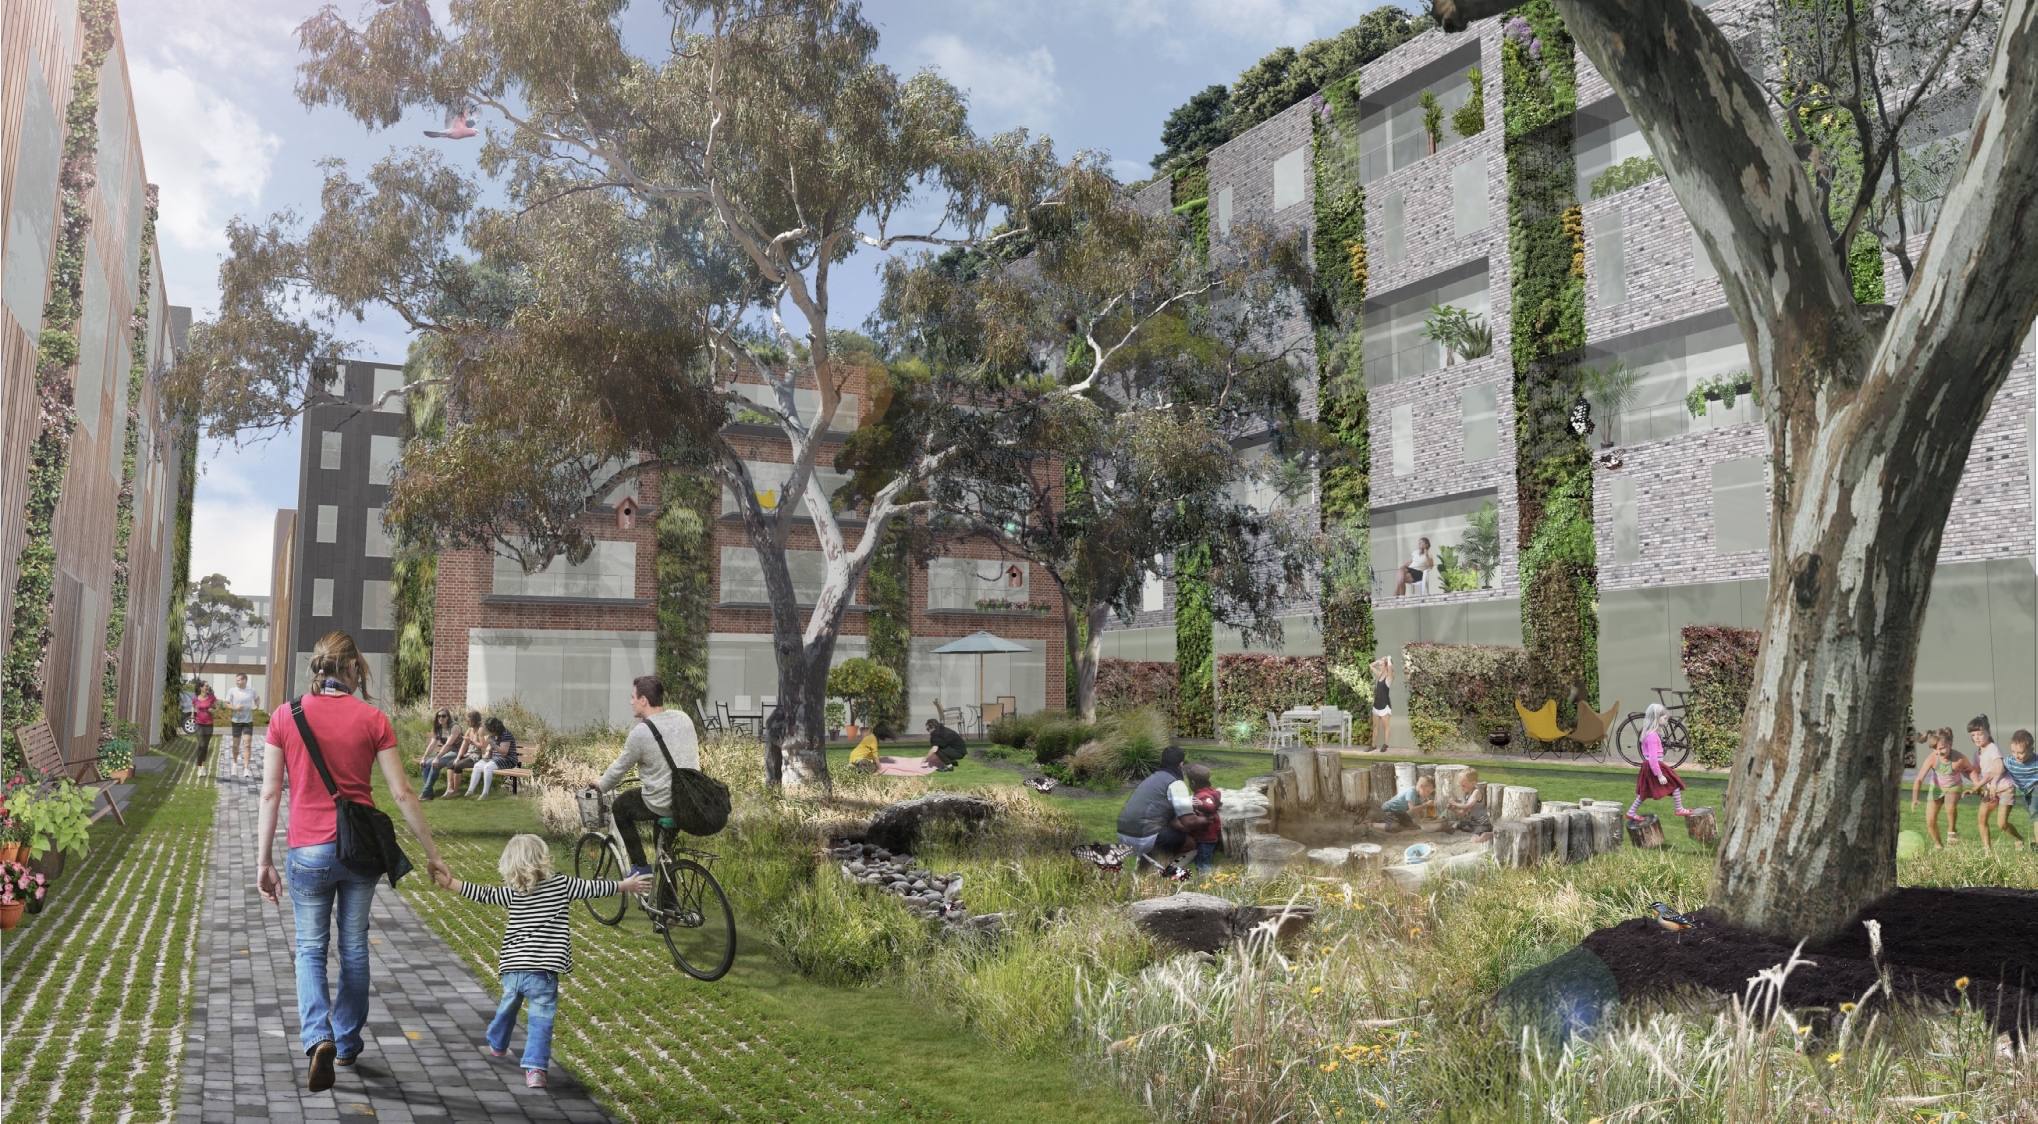 Biodiversity, not just greenery, in our cities is crucial to reaping the benefits of being close to nature. : Image: Rendering by S Bekessy in collaboration with C Horwill, J Ware & M Baracco, RMIT’s School of Architecture and Design CC BY 4.0